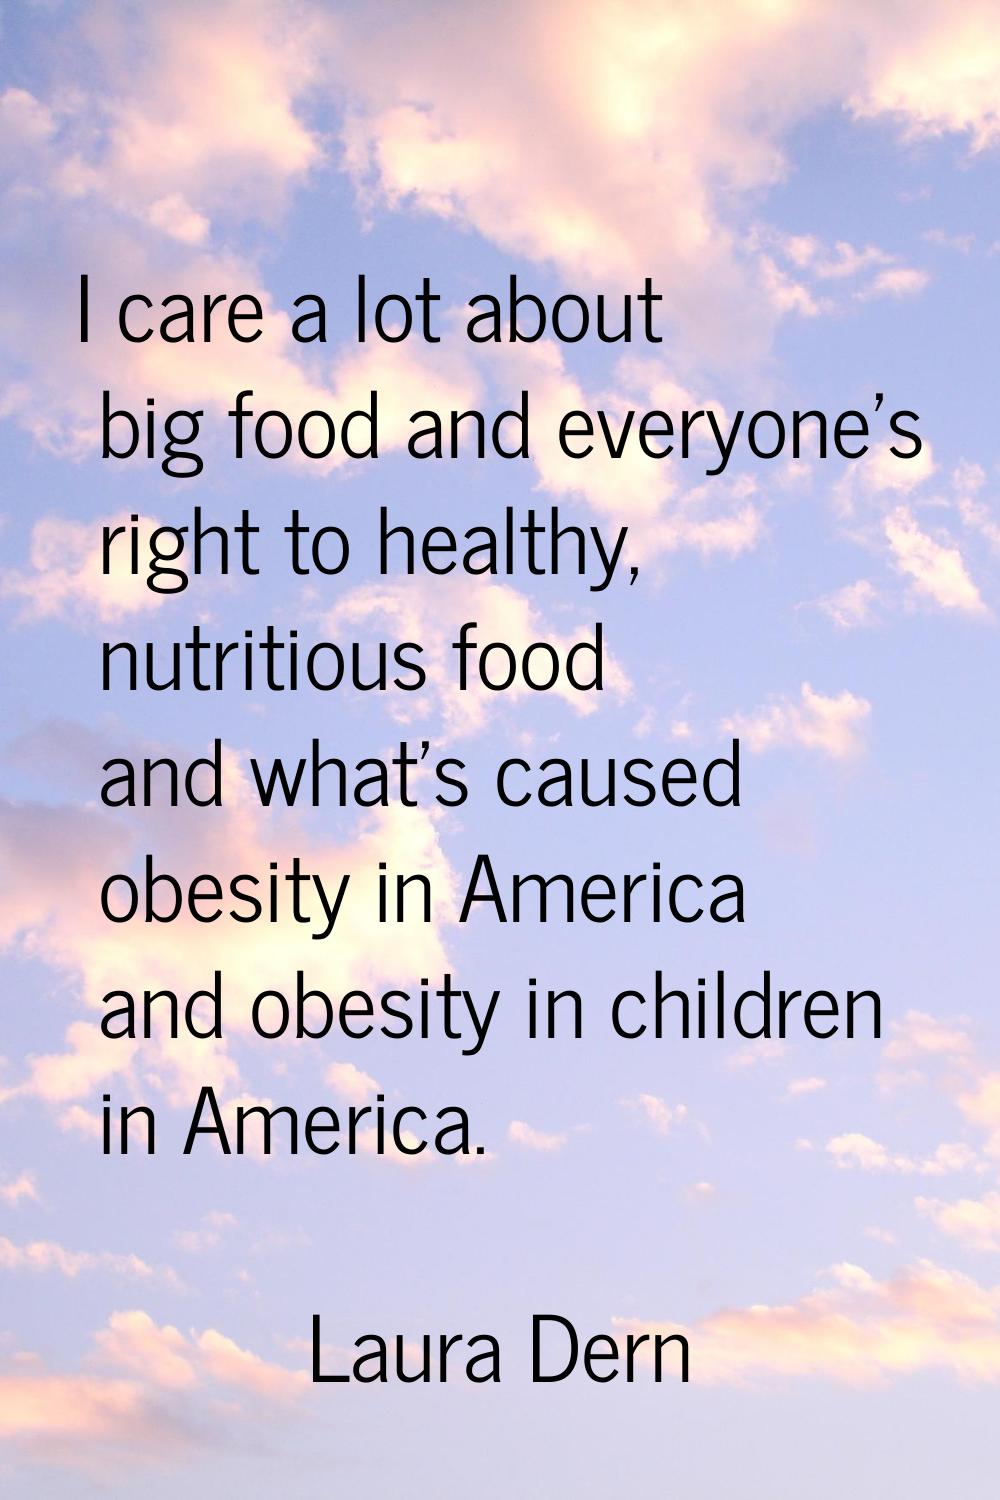 I care a lot about big food and everyone's right to healthy, nutritious food and what's caused obes